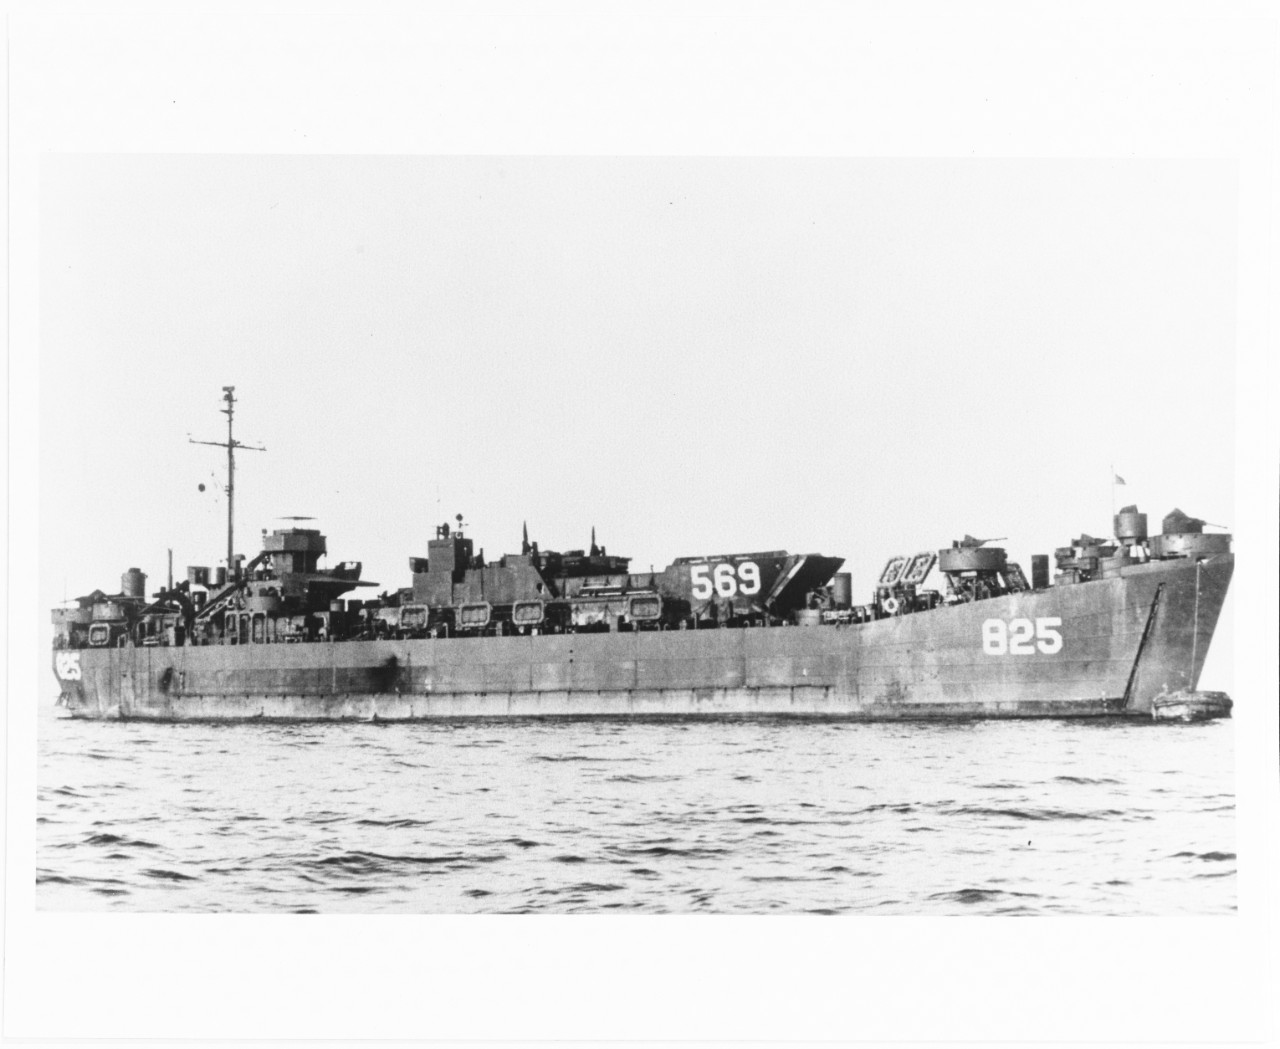 USS LST-825 (Later:  HICKMAN CTY)